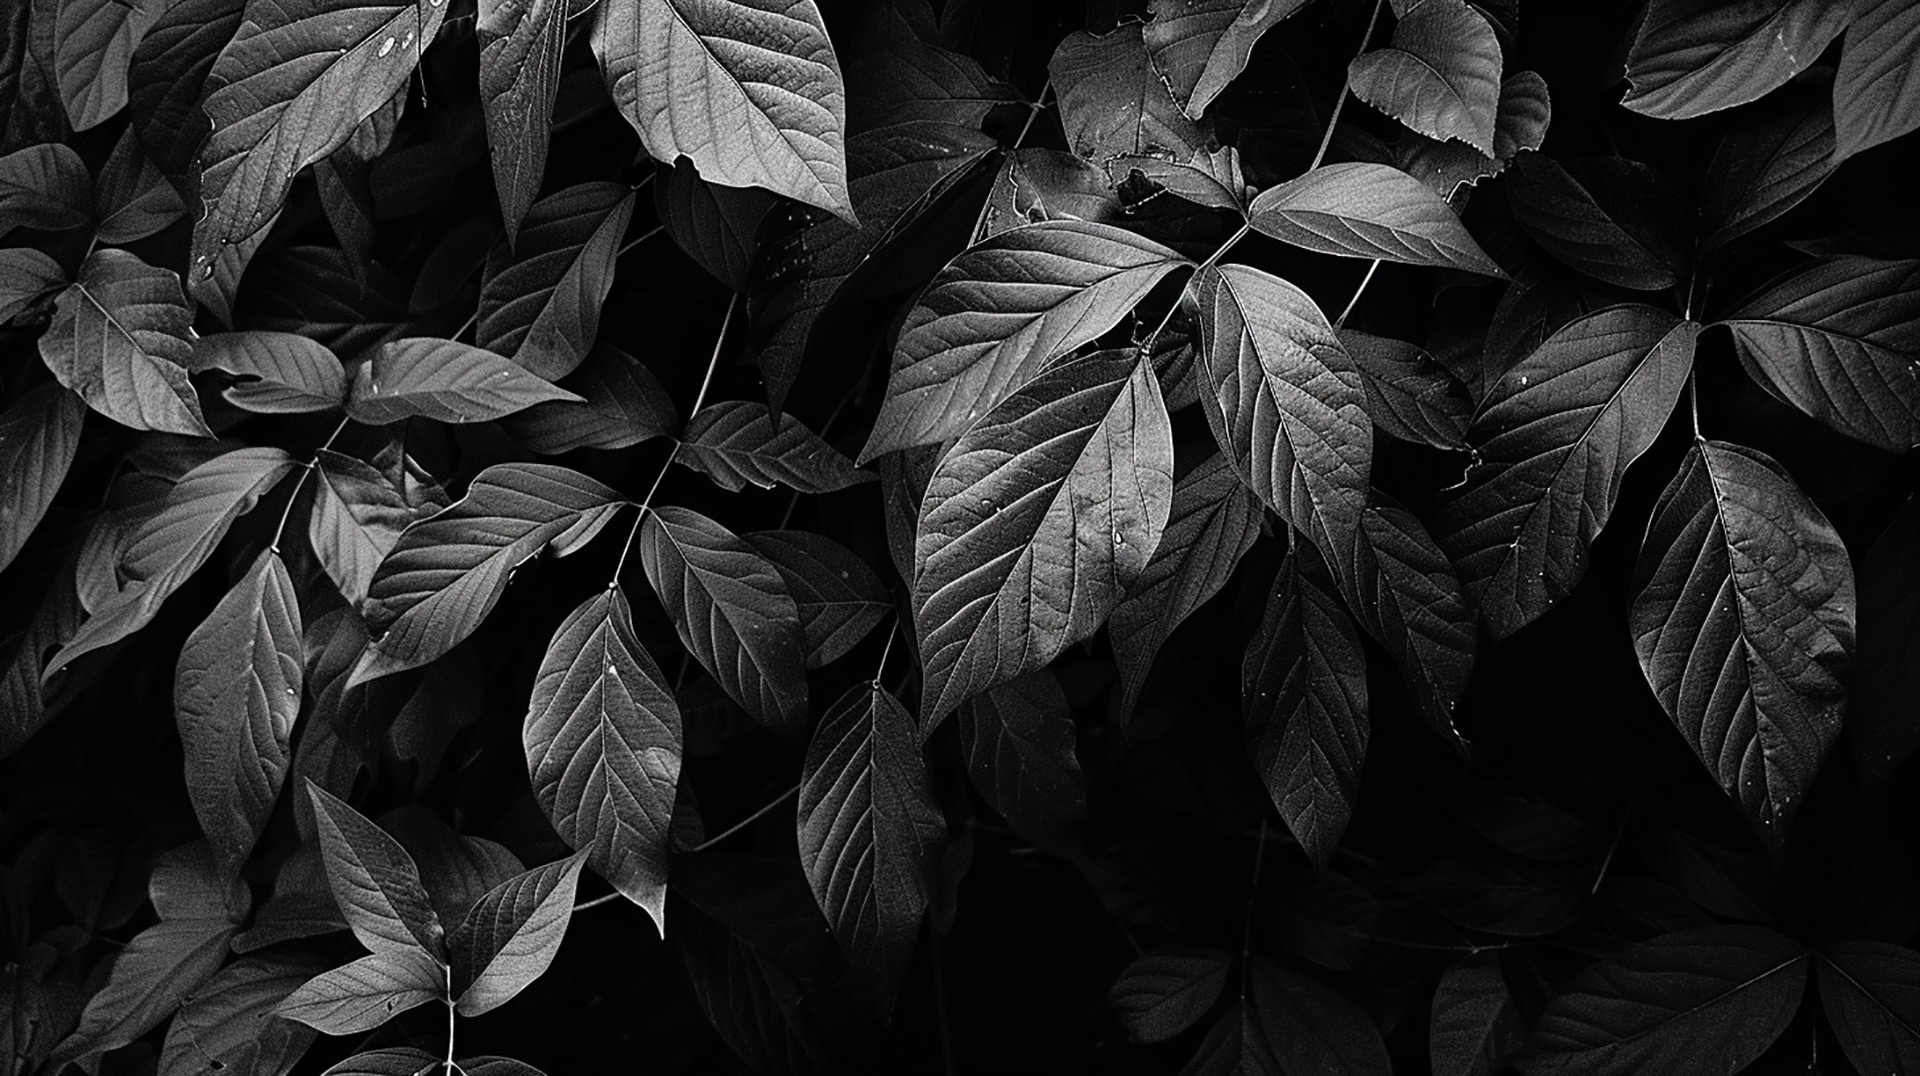 Jungle Shadows: Mysterious Settings for Desktop Wallpapers